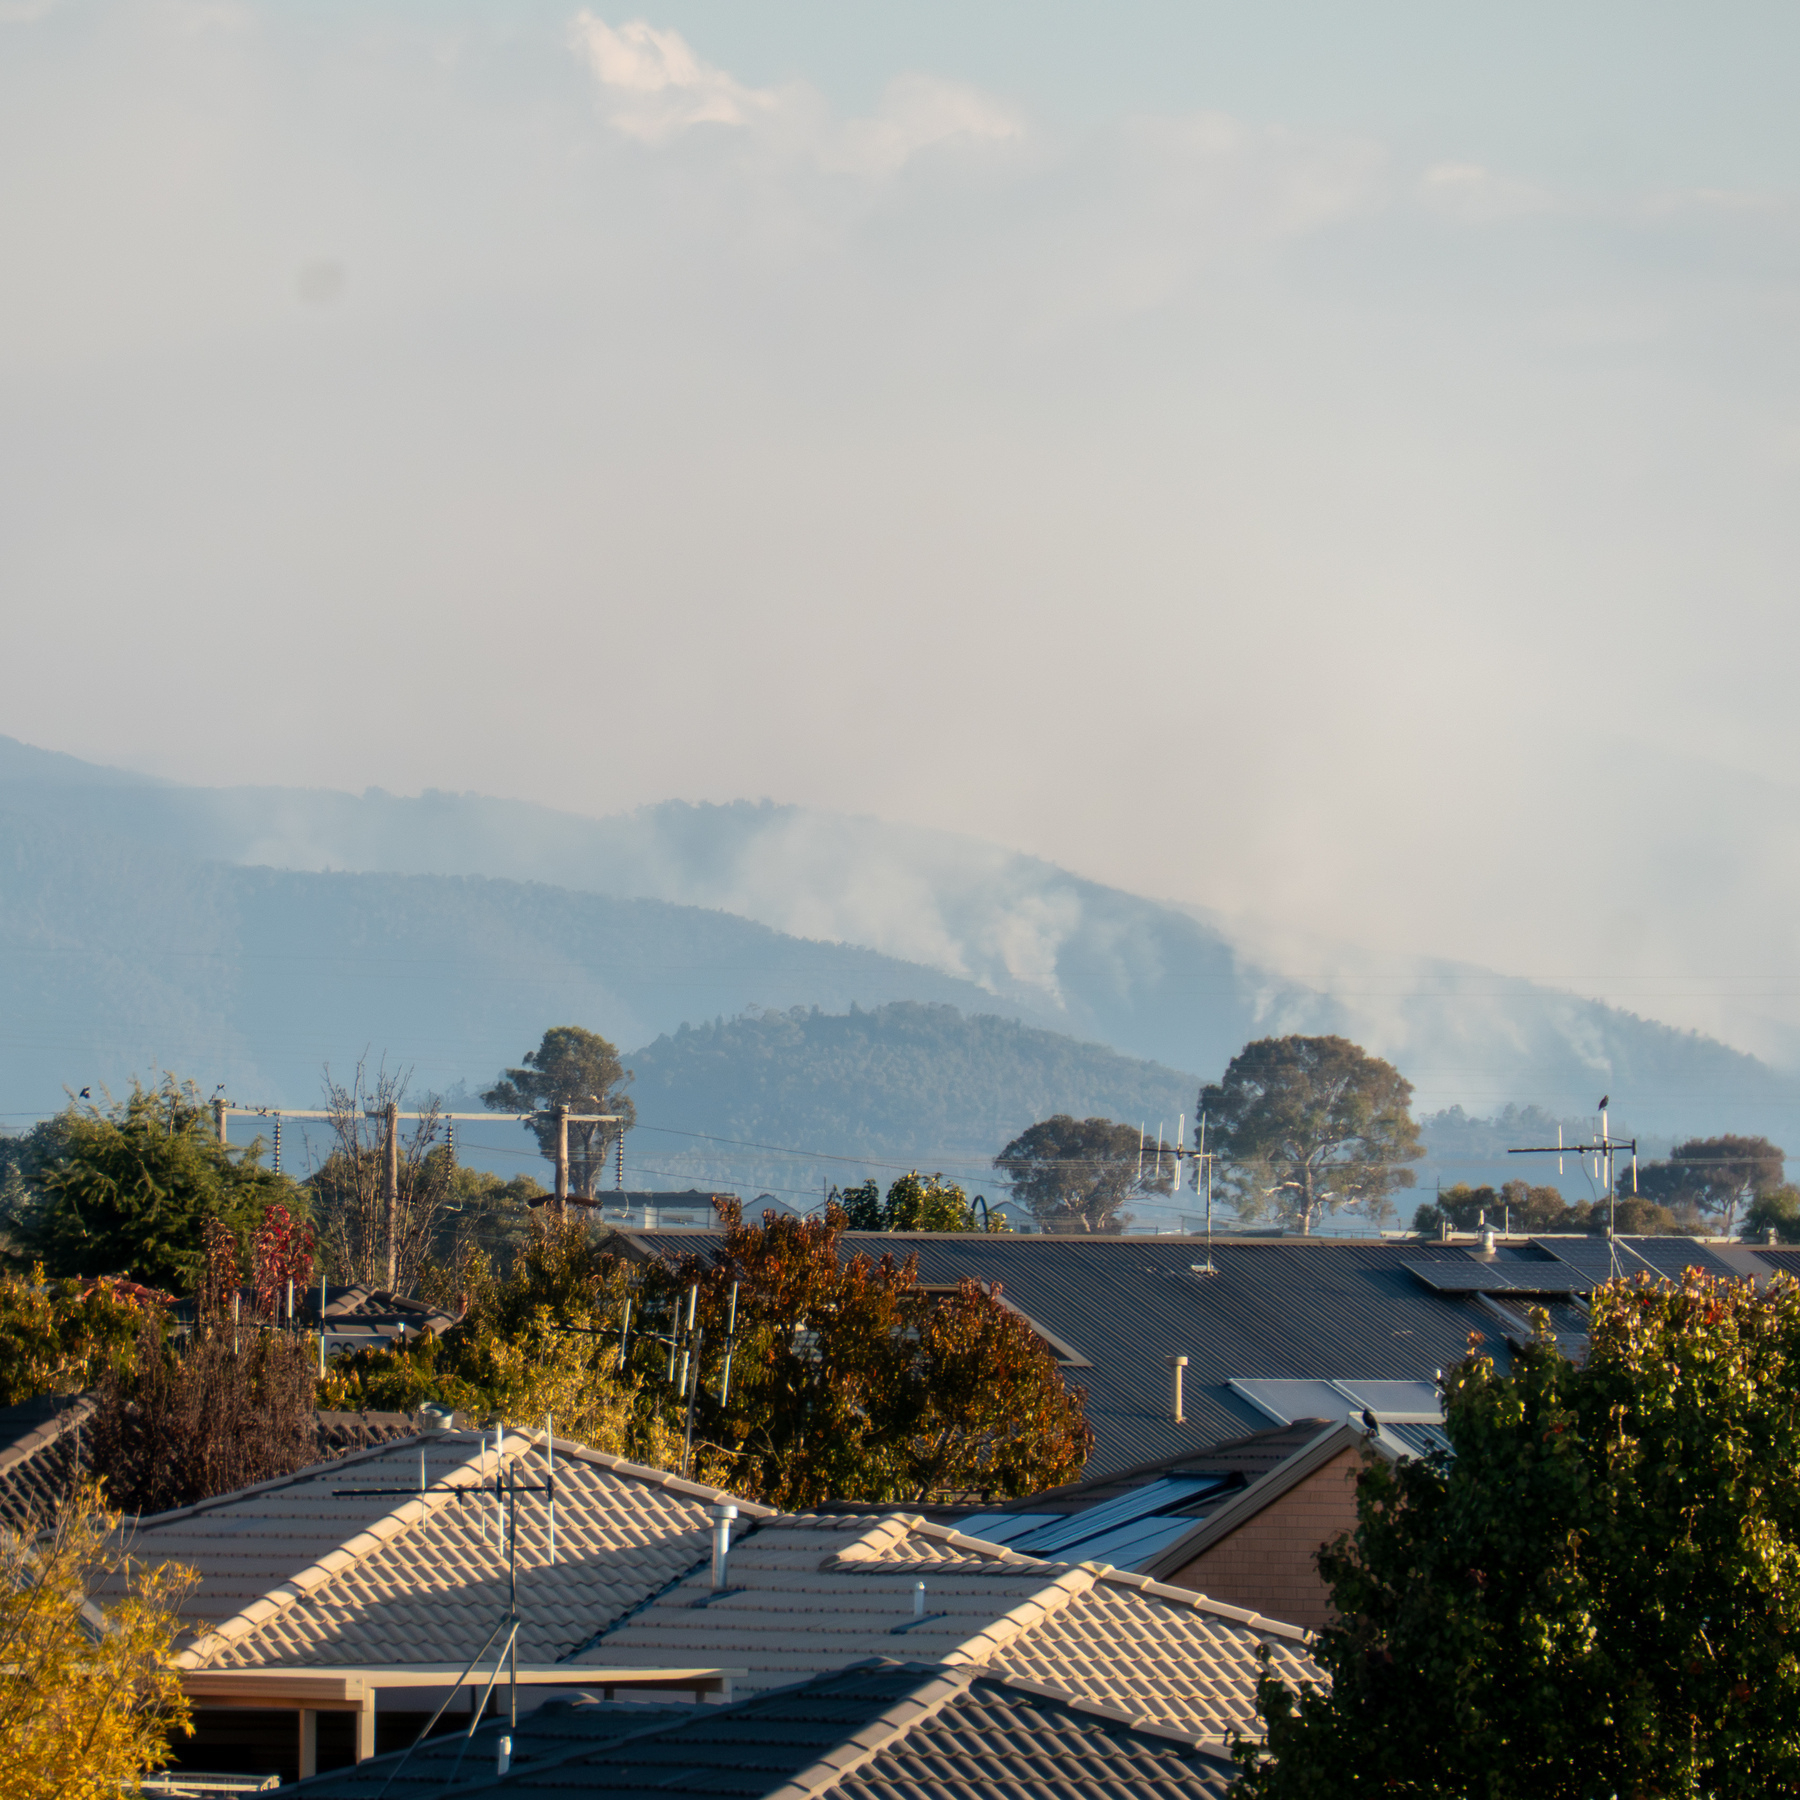 Smoke rising from mountains in the distance. Roofs of houses in the foreground.